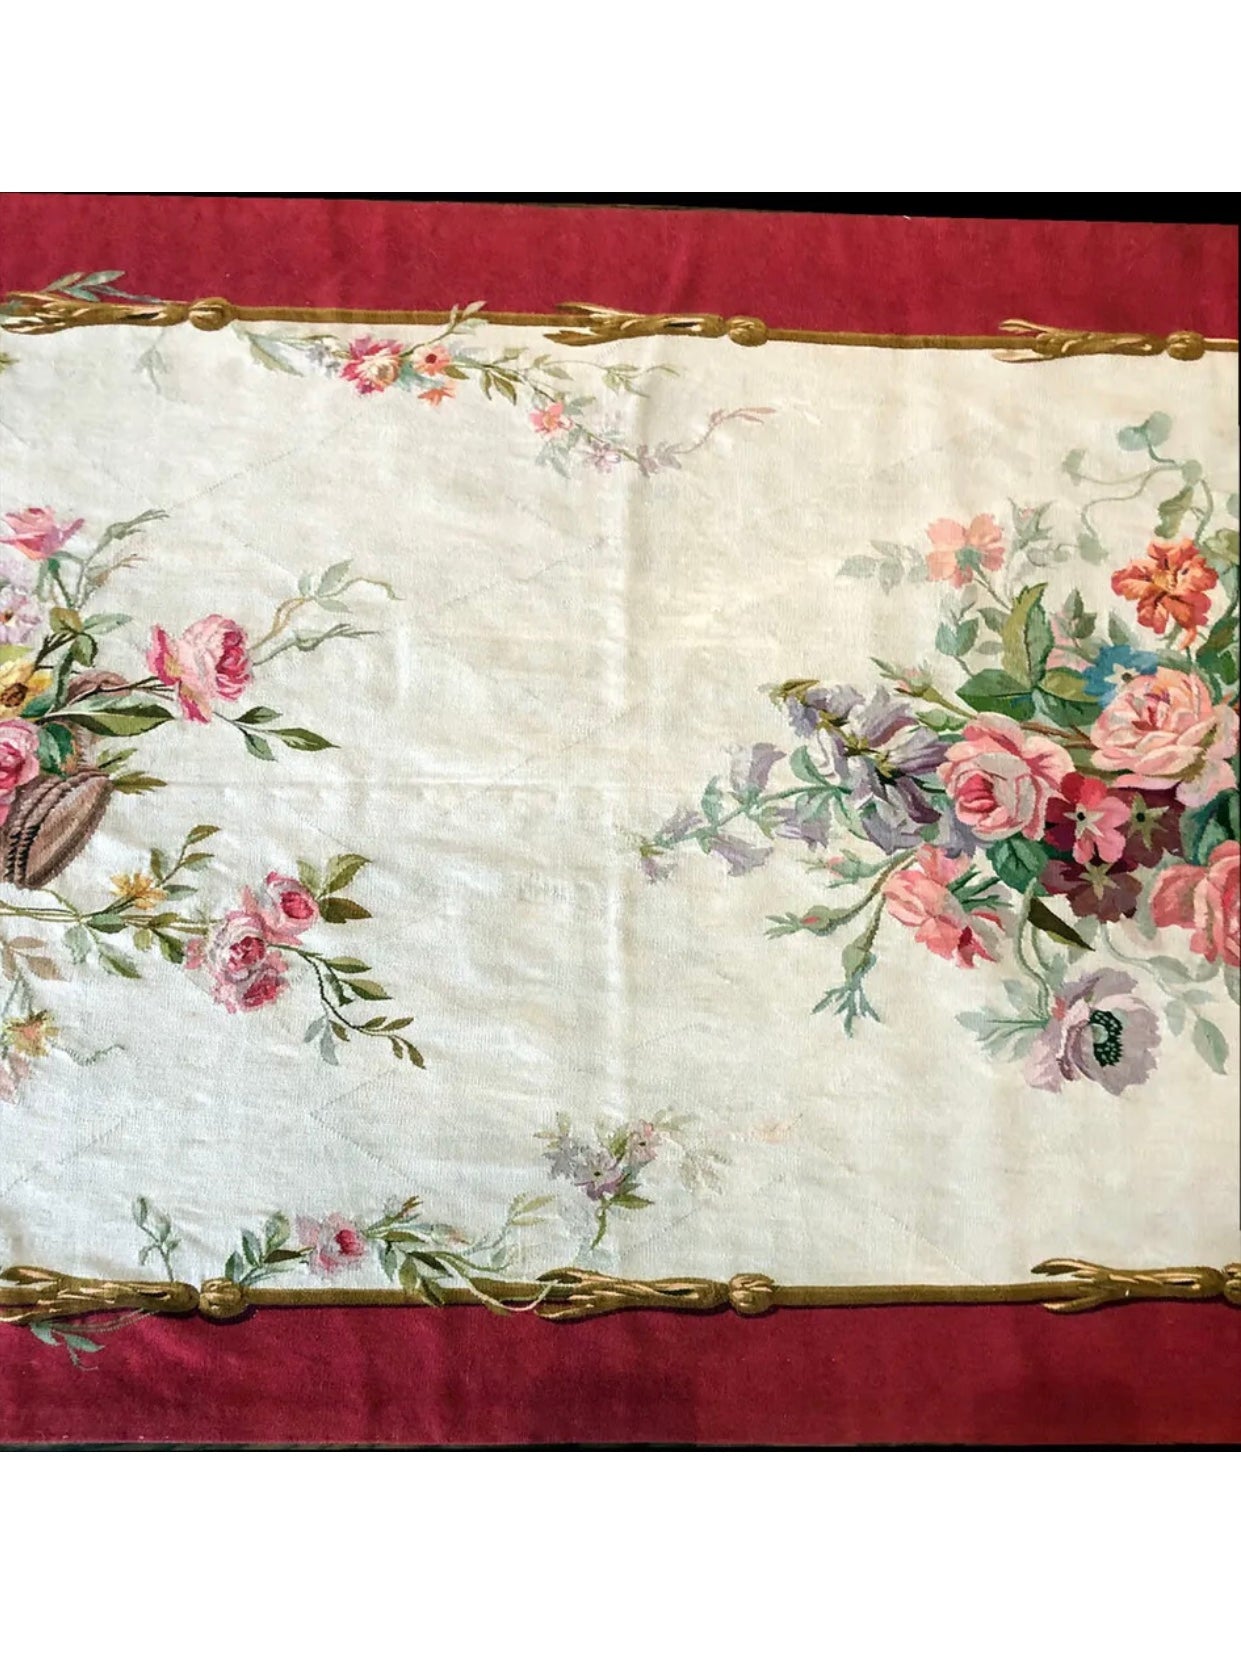 A 19th Century French Aubusson Panel